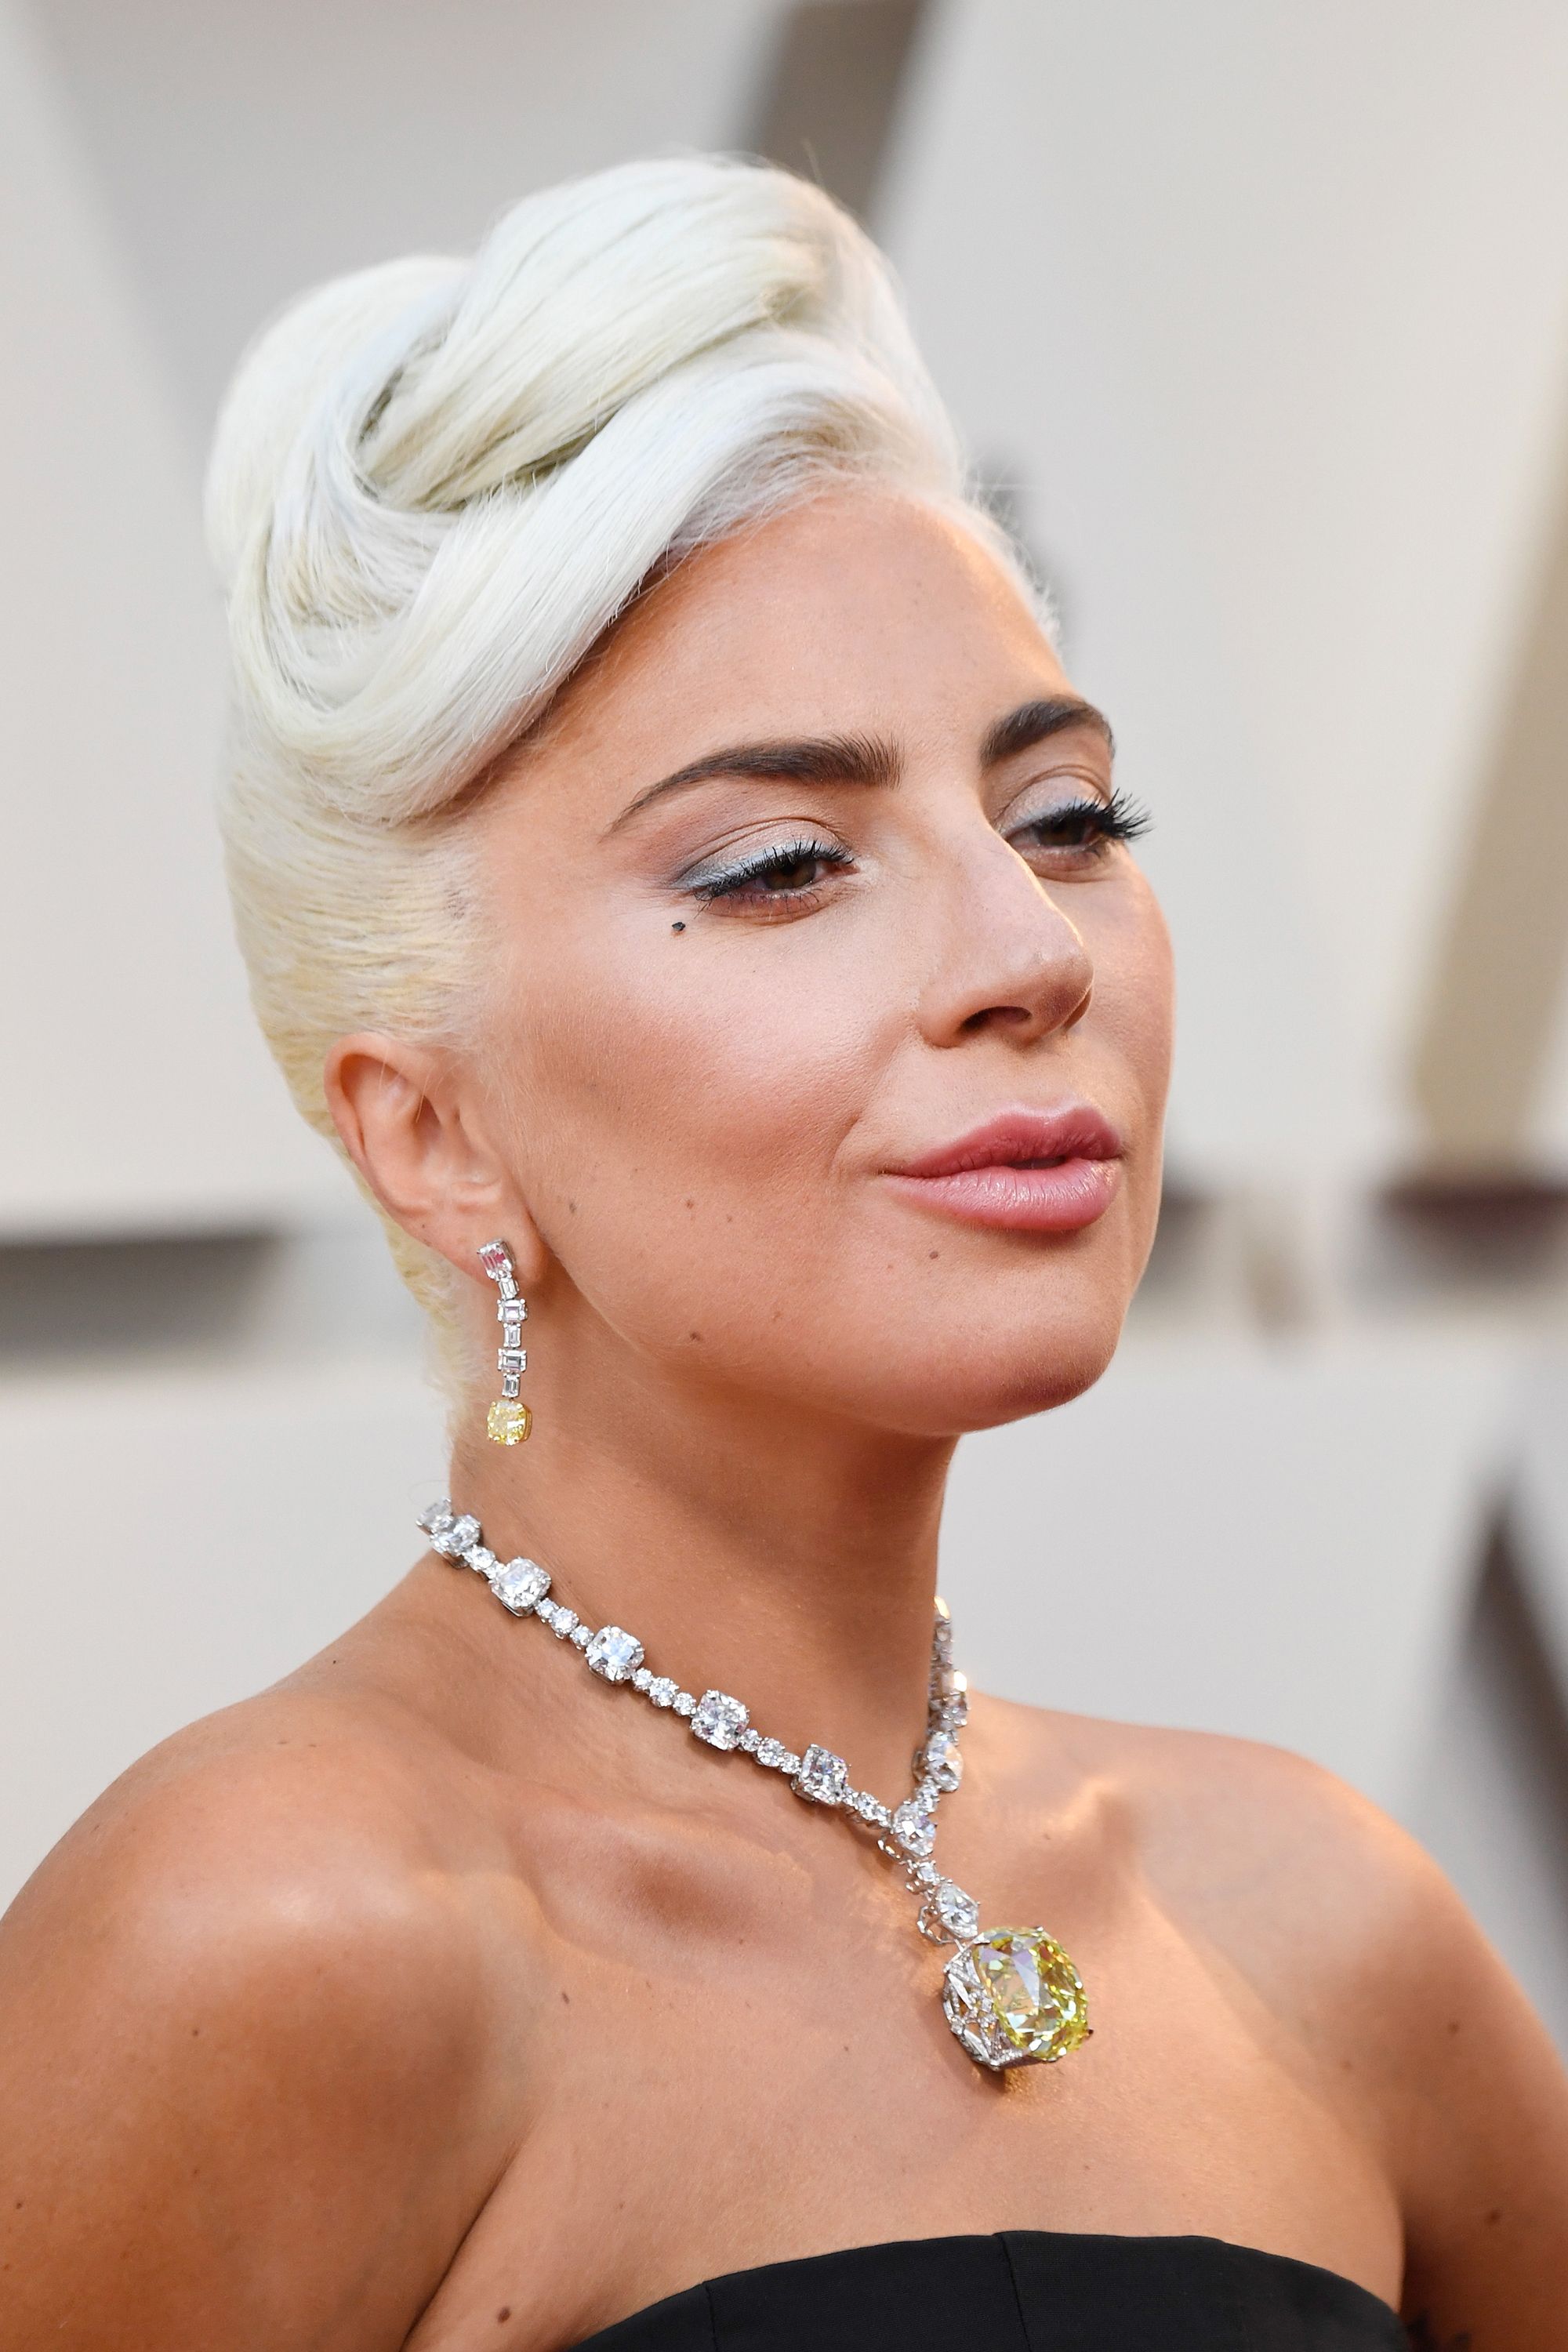 Lady Gaga wore a $30 million necklace 